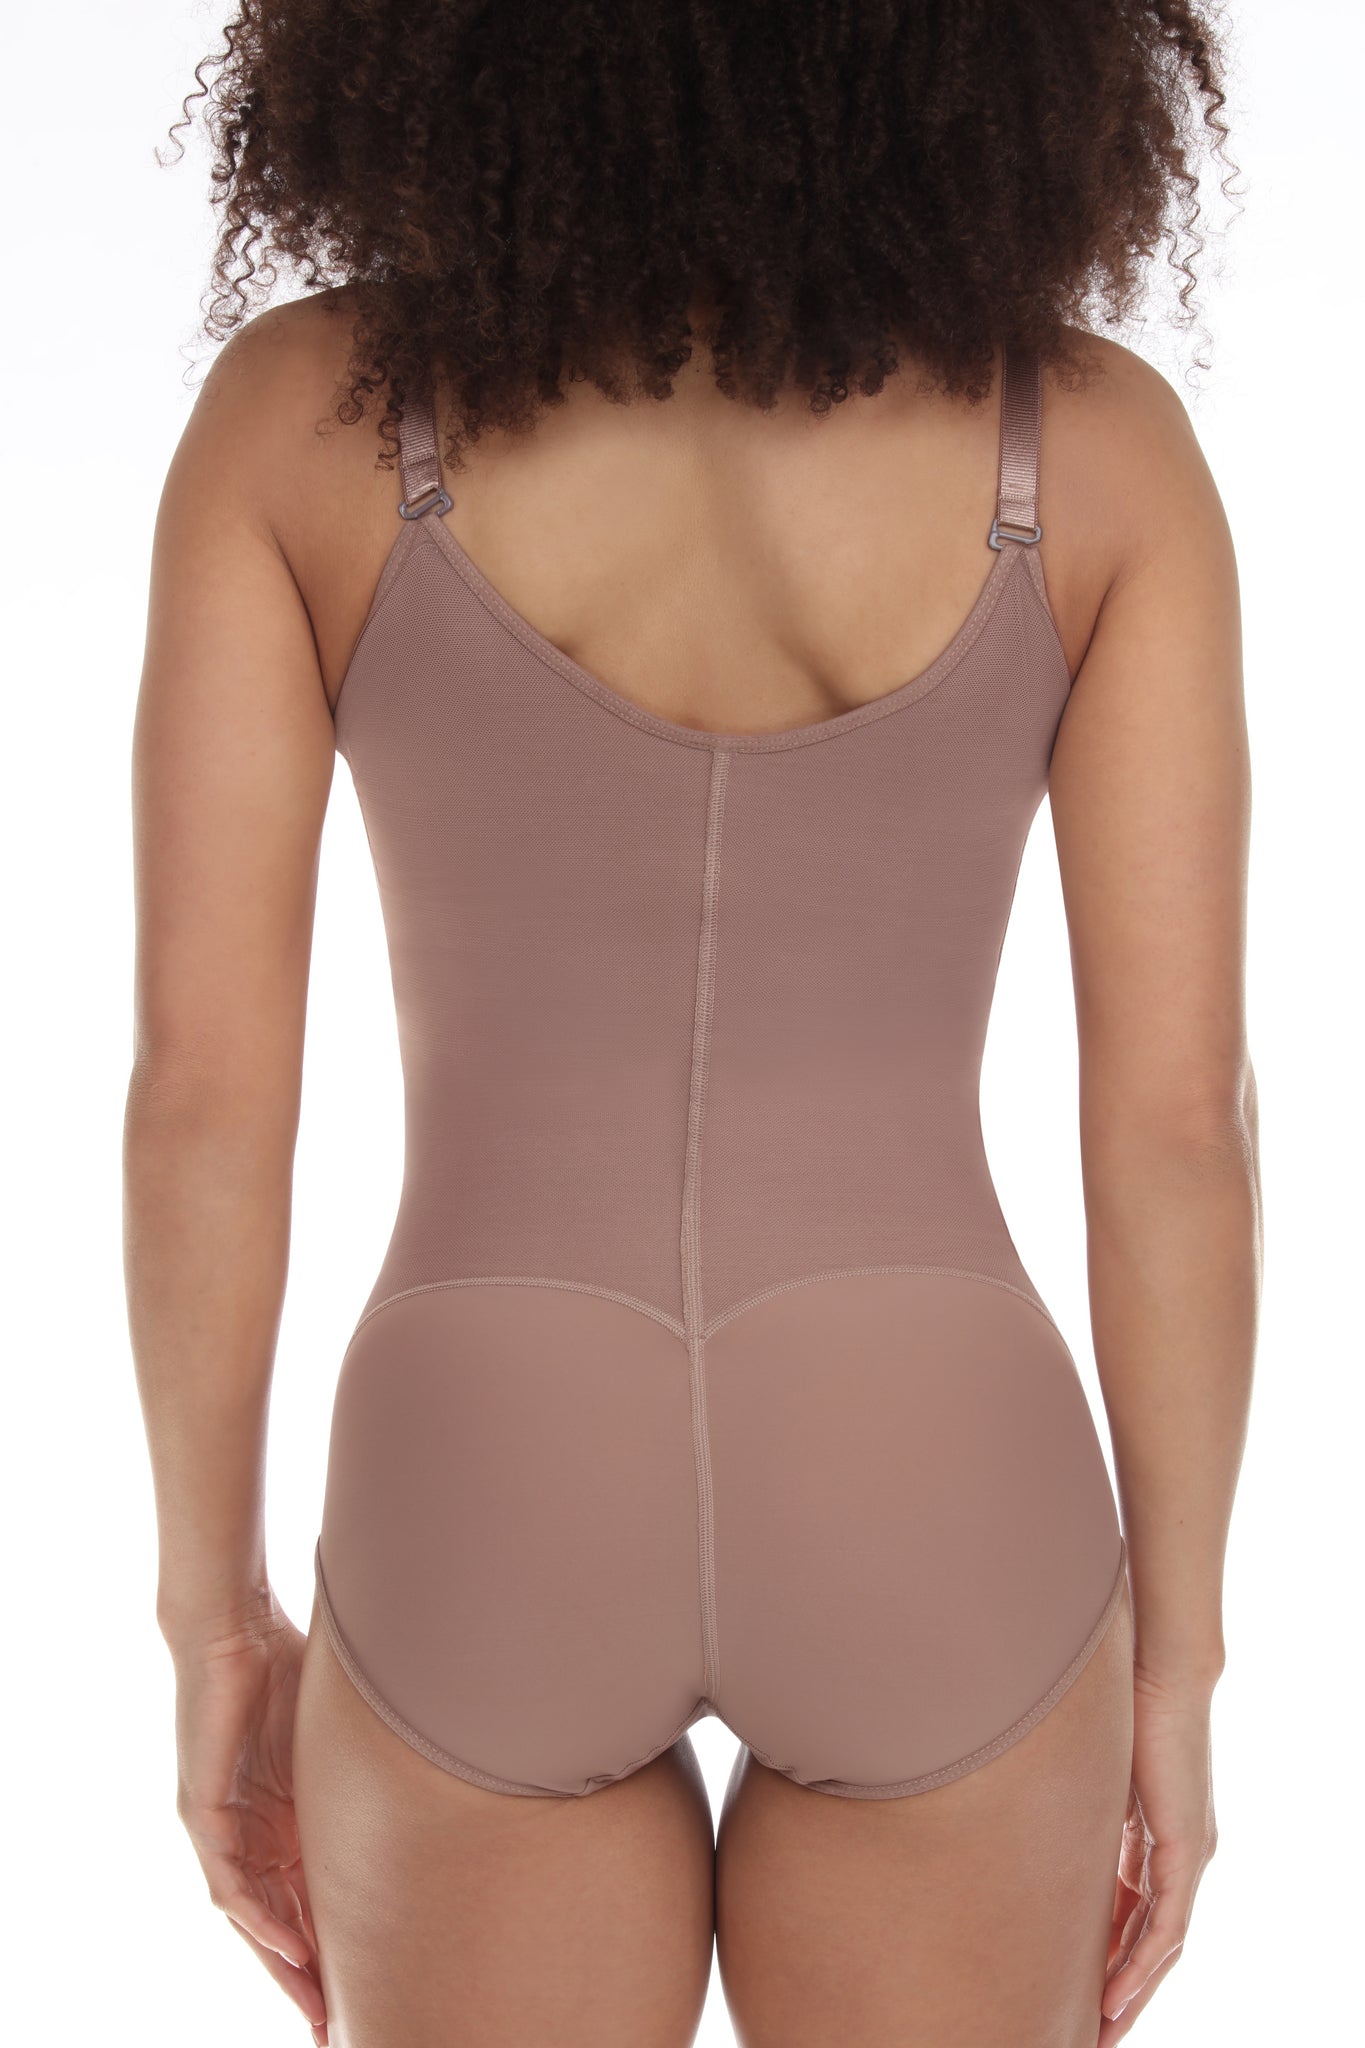 Perfect Shape All Body Shapers Tummy Shapers Waist Shapers Shape My Hips and Thighs Shape My Back Full Back Coverage Shapers Women's Liposuction 